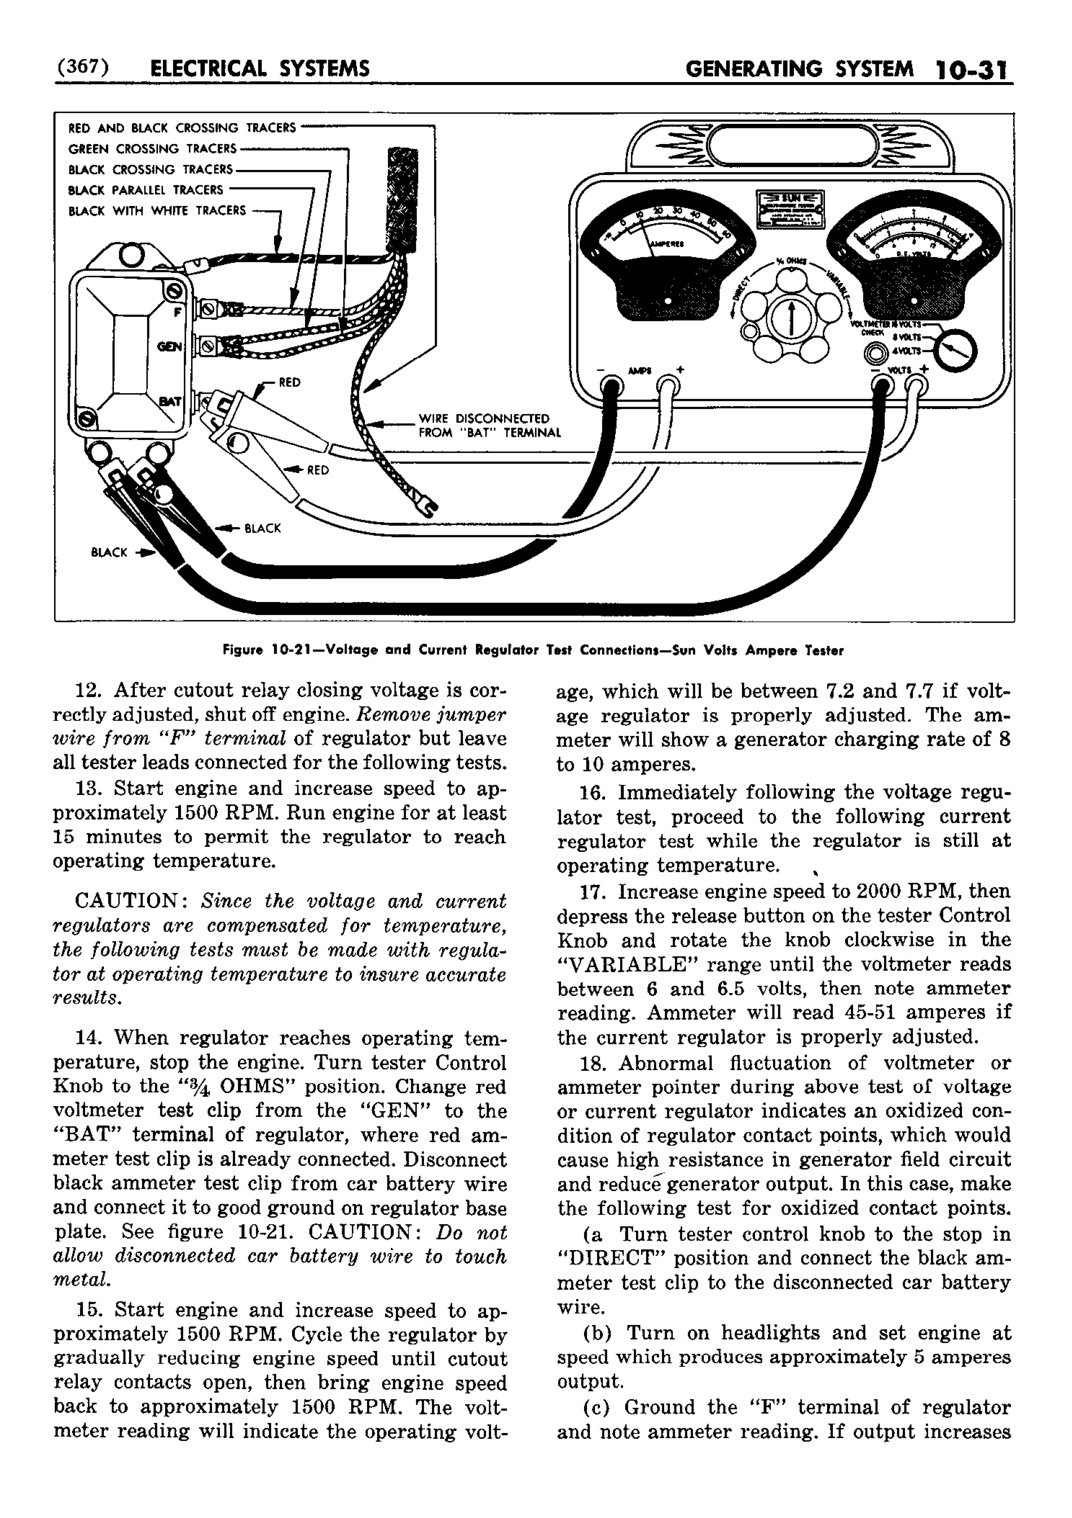 n_11 1952 Buick Shop Manual - Electrical Systems-031-031.jpg